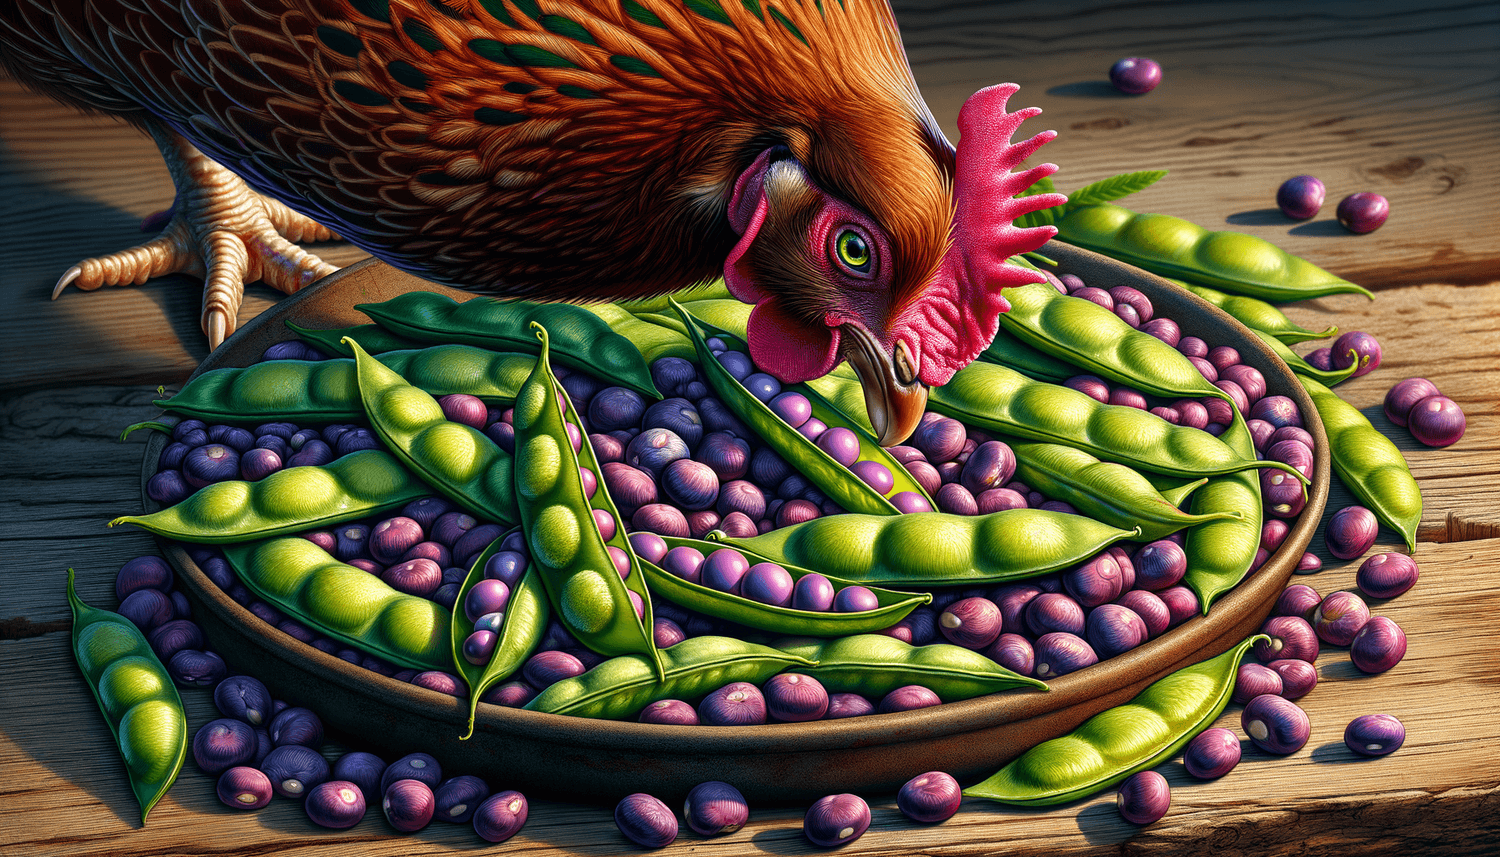 Can Chickens Eat Purple Hull Peas?